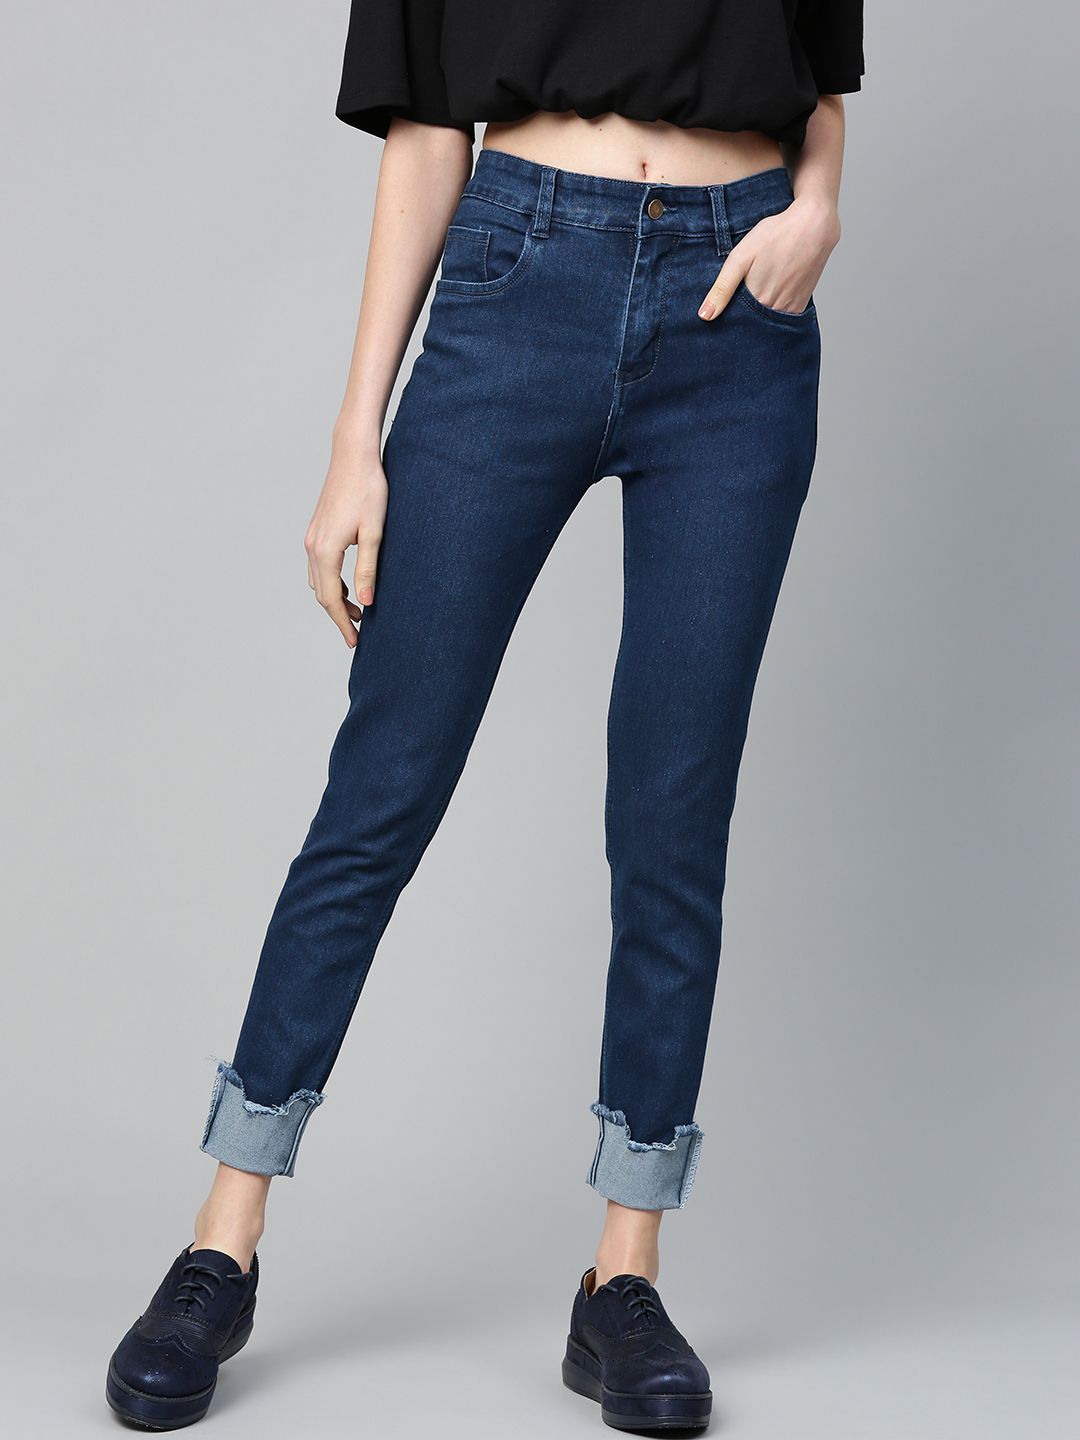 SASSAFRAS Women Navy Blue Slim Fit Mid-Rise Clean Look Jeans Price in India